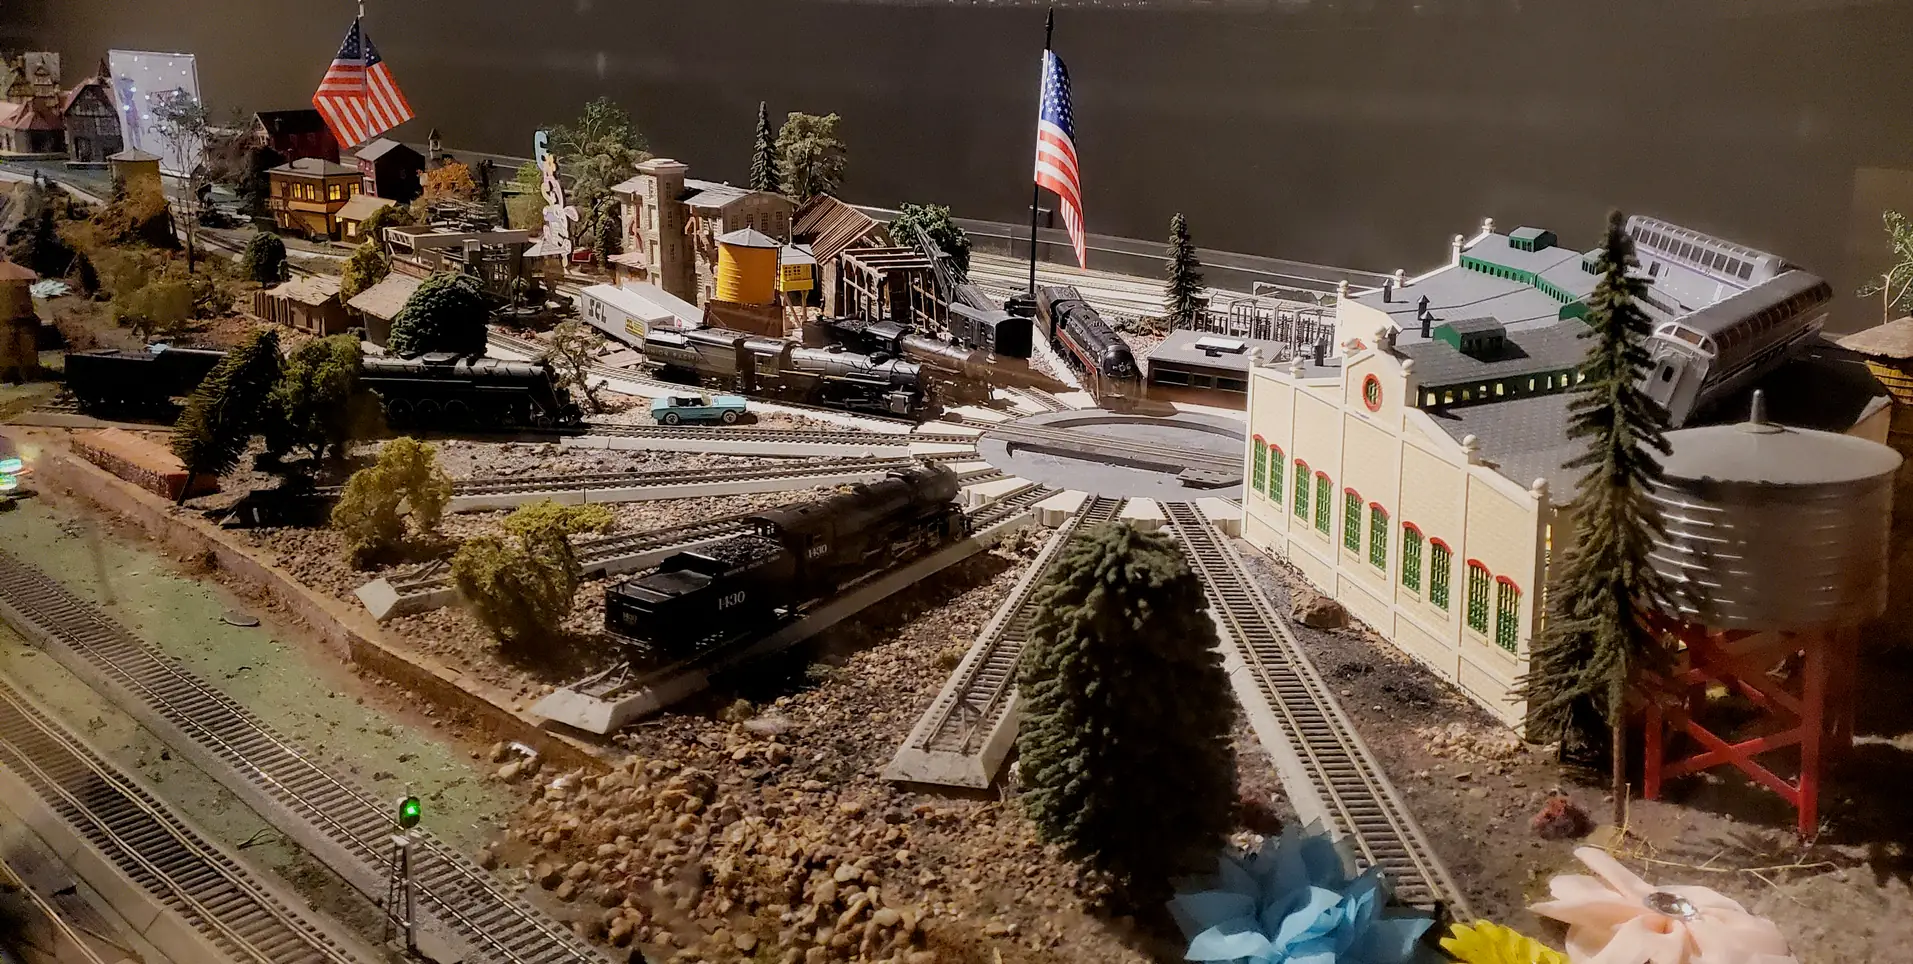 model trains at Union Station